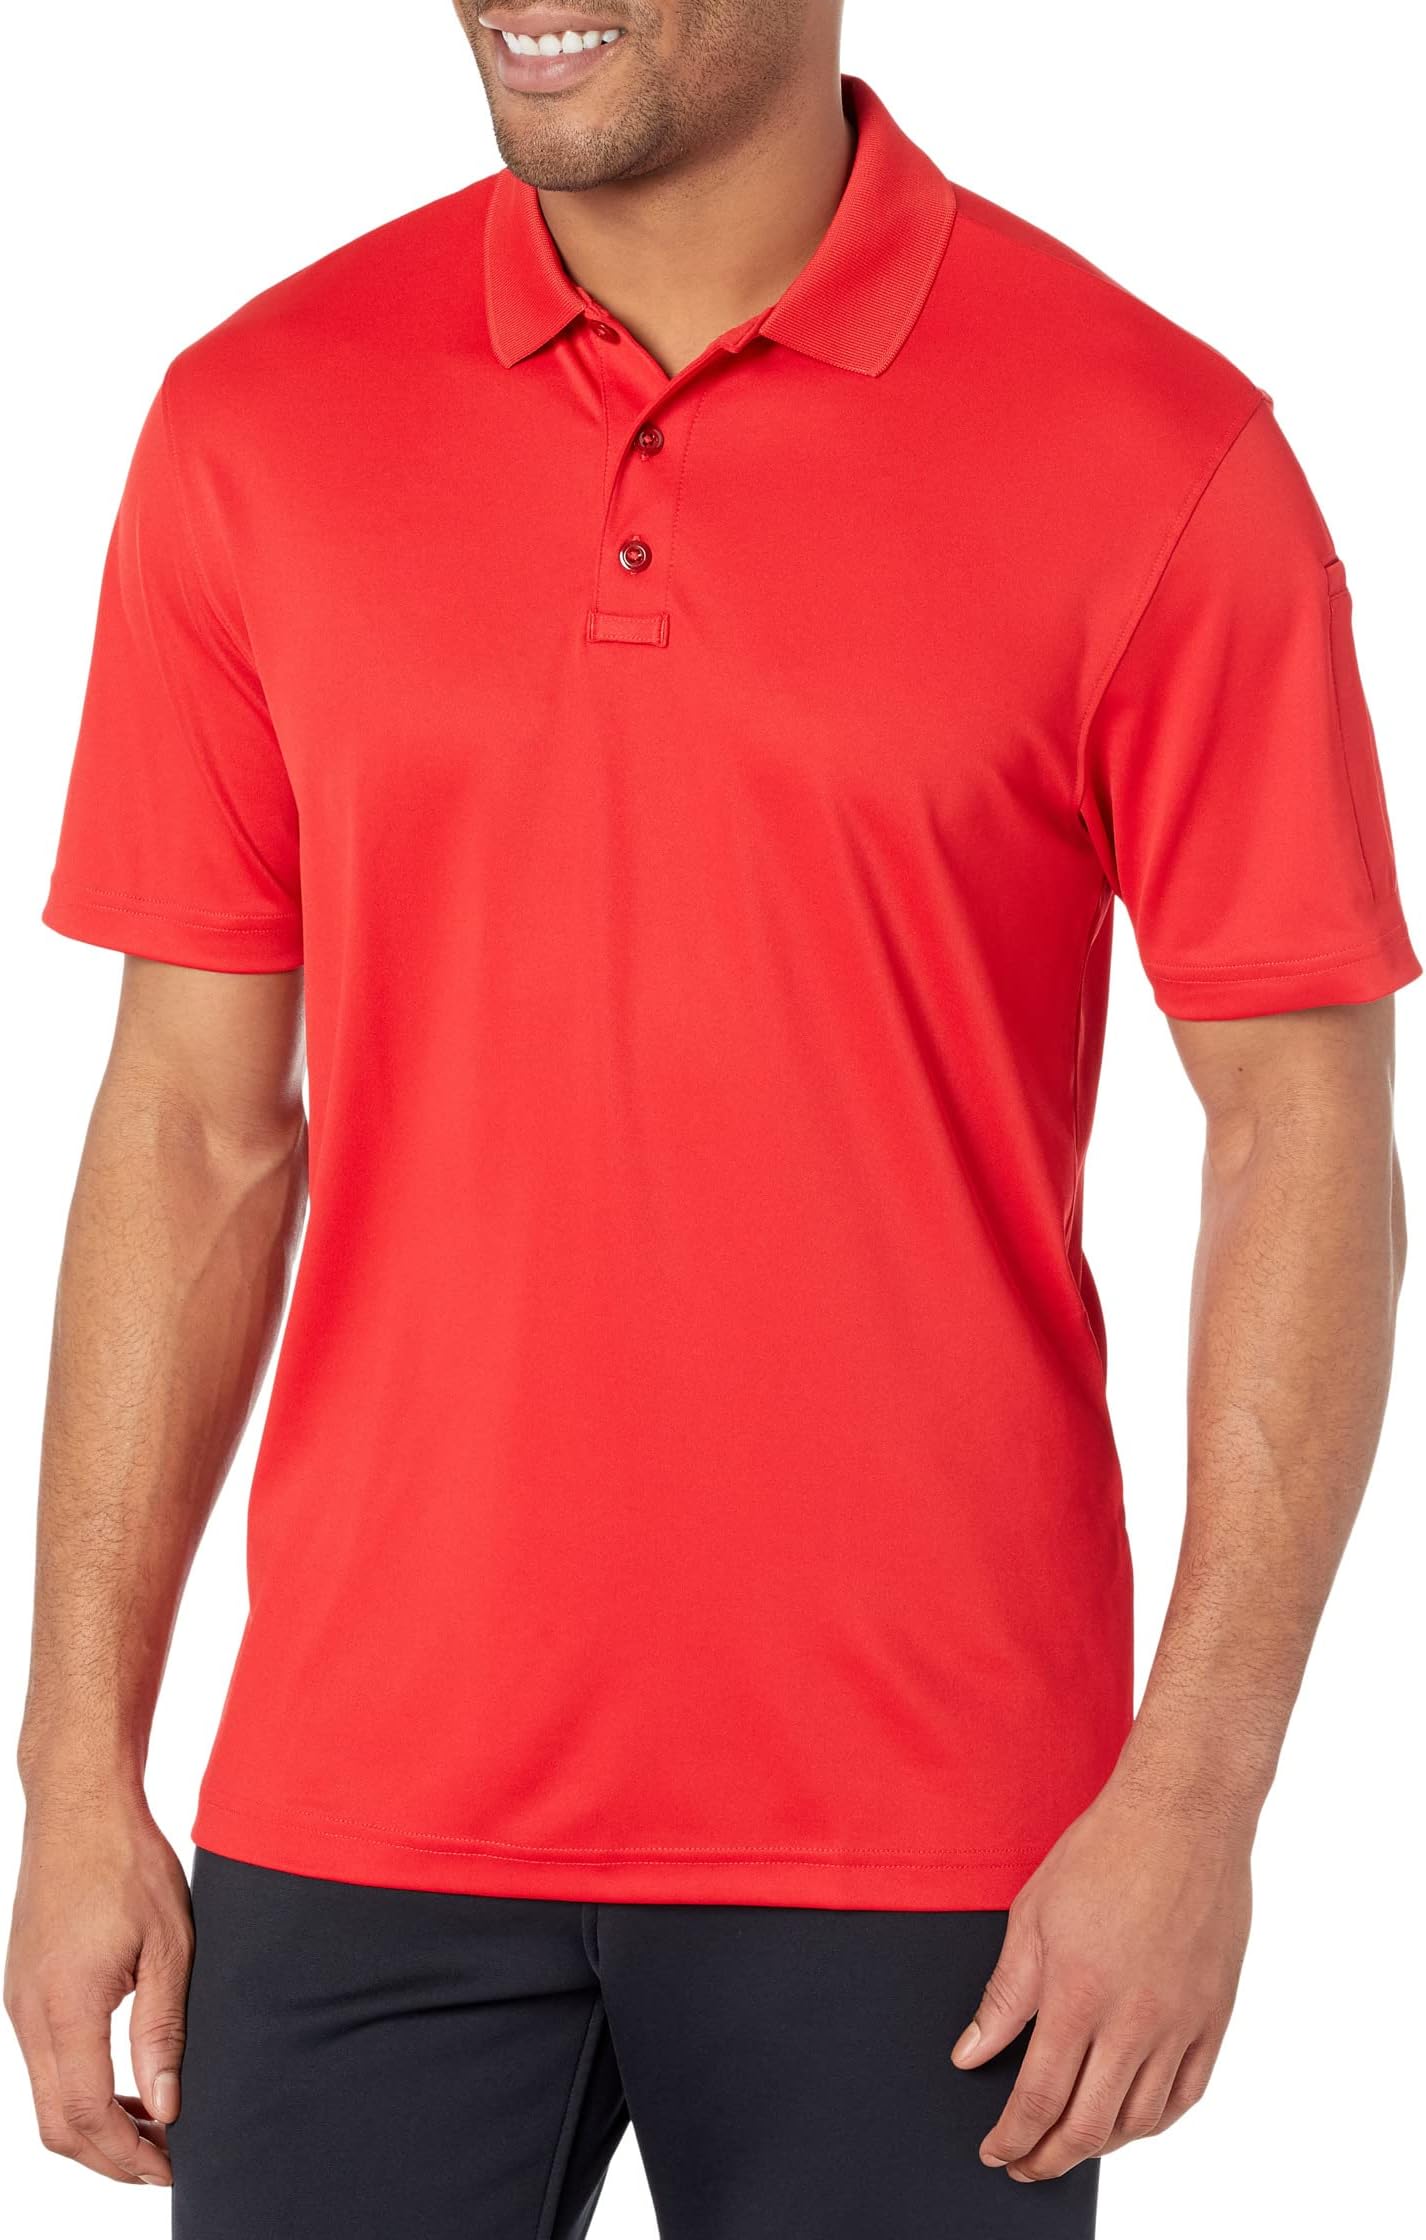 Tac Performance Polo 2.0 Under Armour, цвет Red/Red